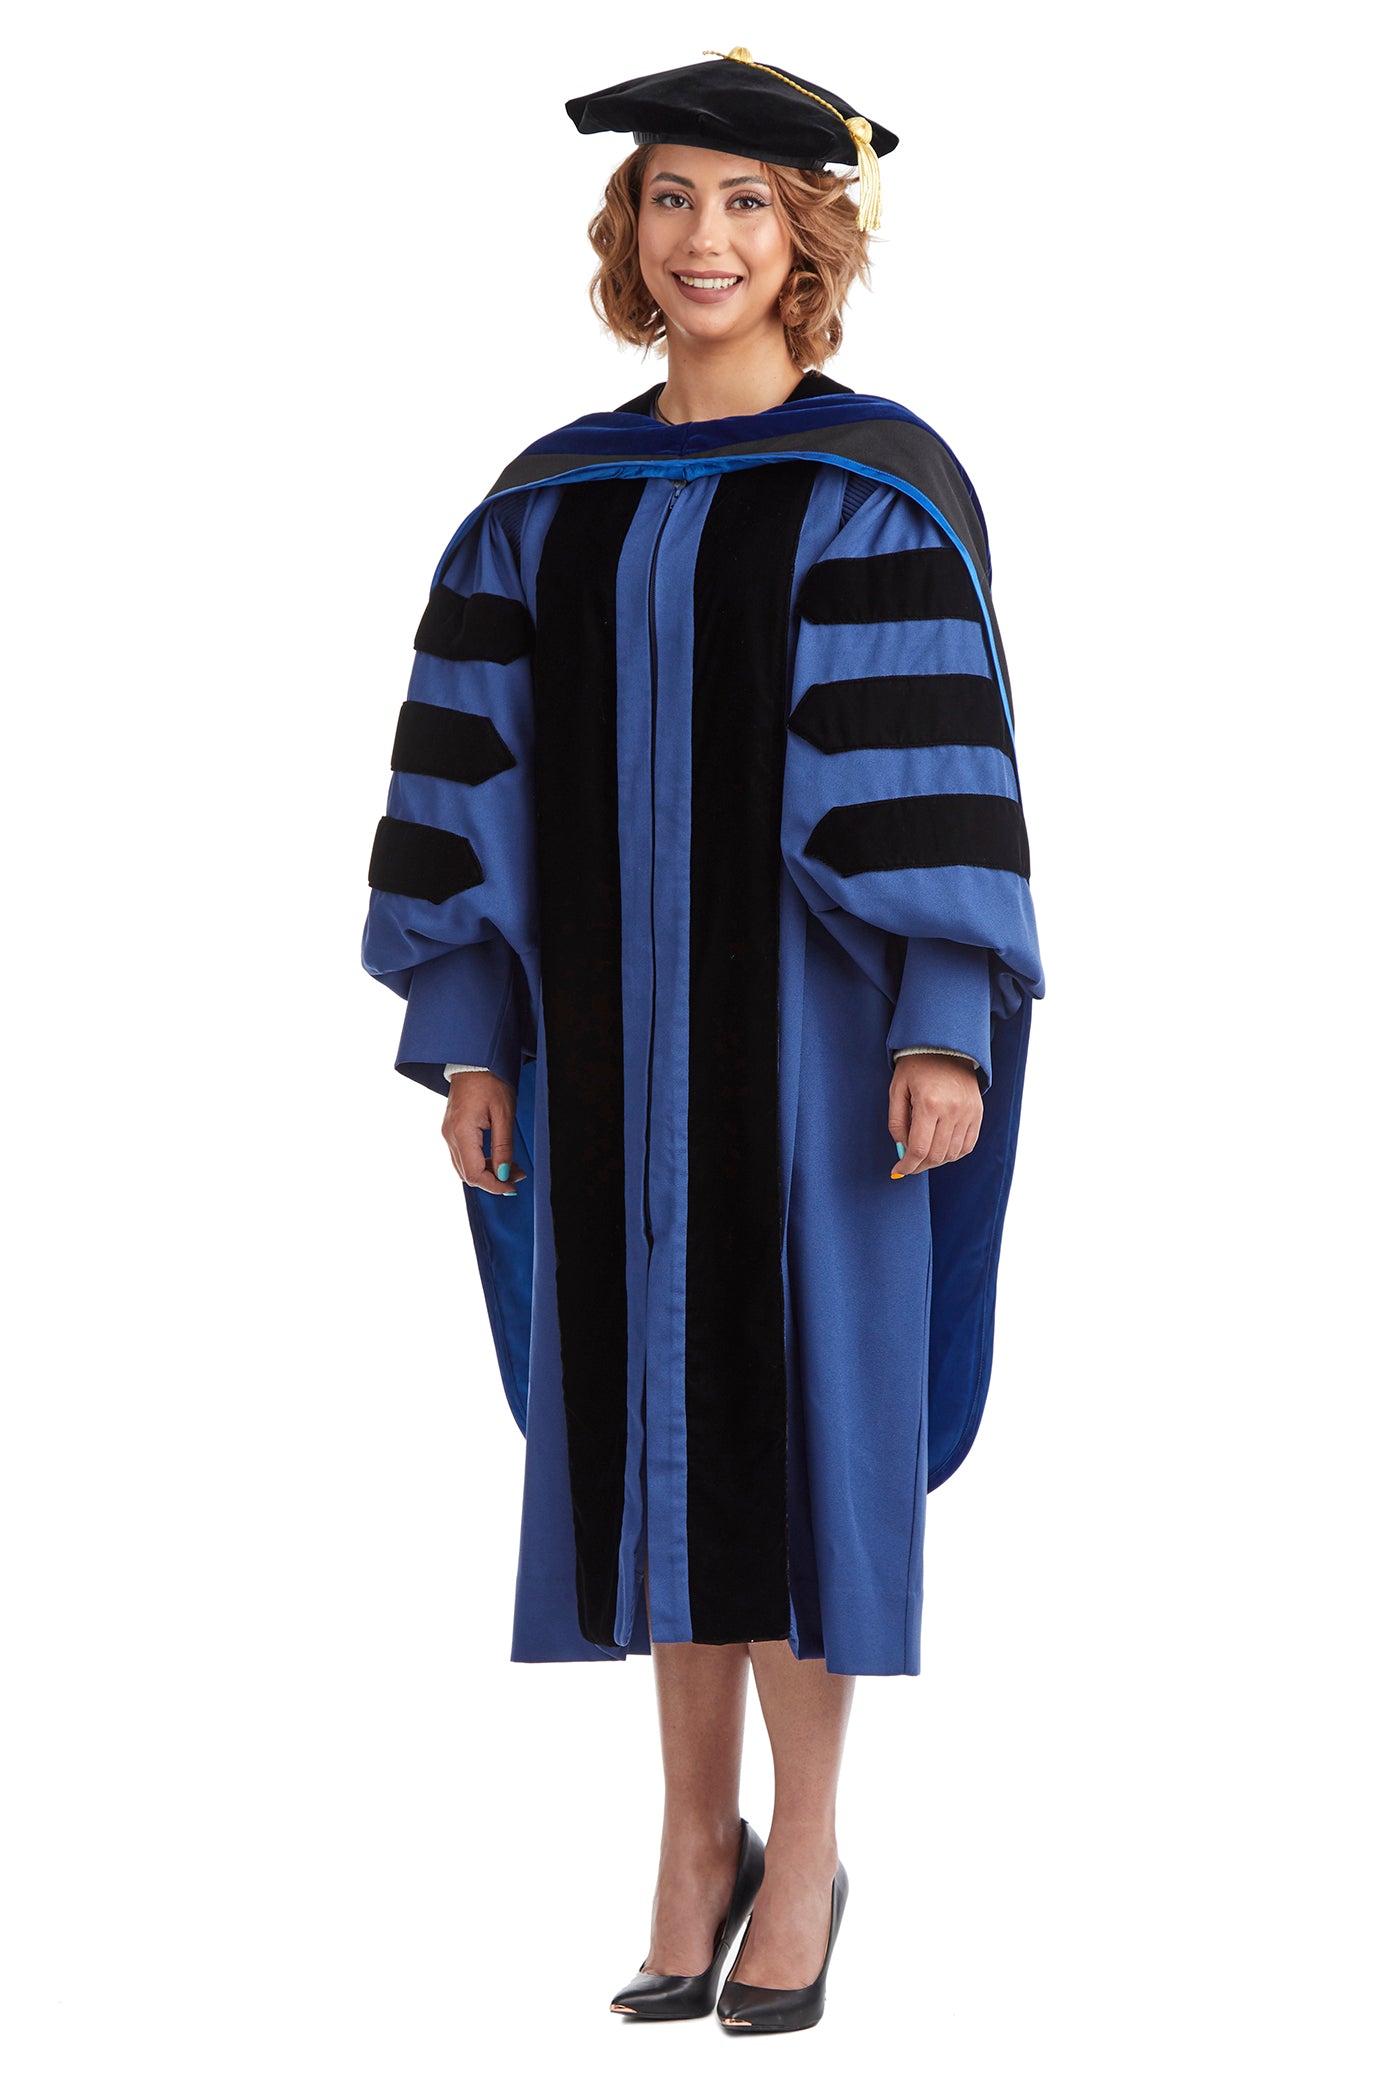 Yale Commencement Doctoral Regalia - Gowns, Hoods, & Tams – CAPGOWN